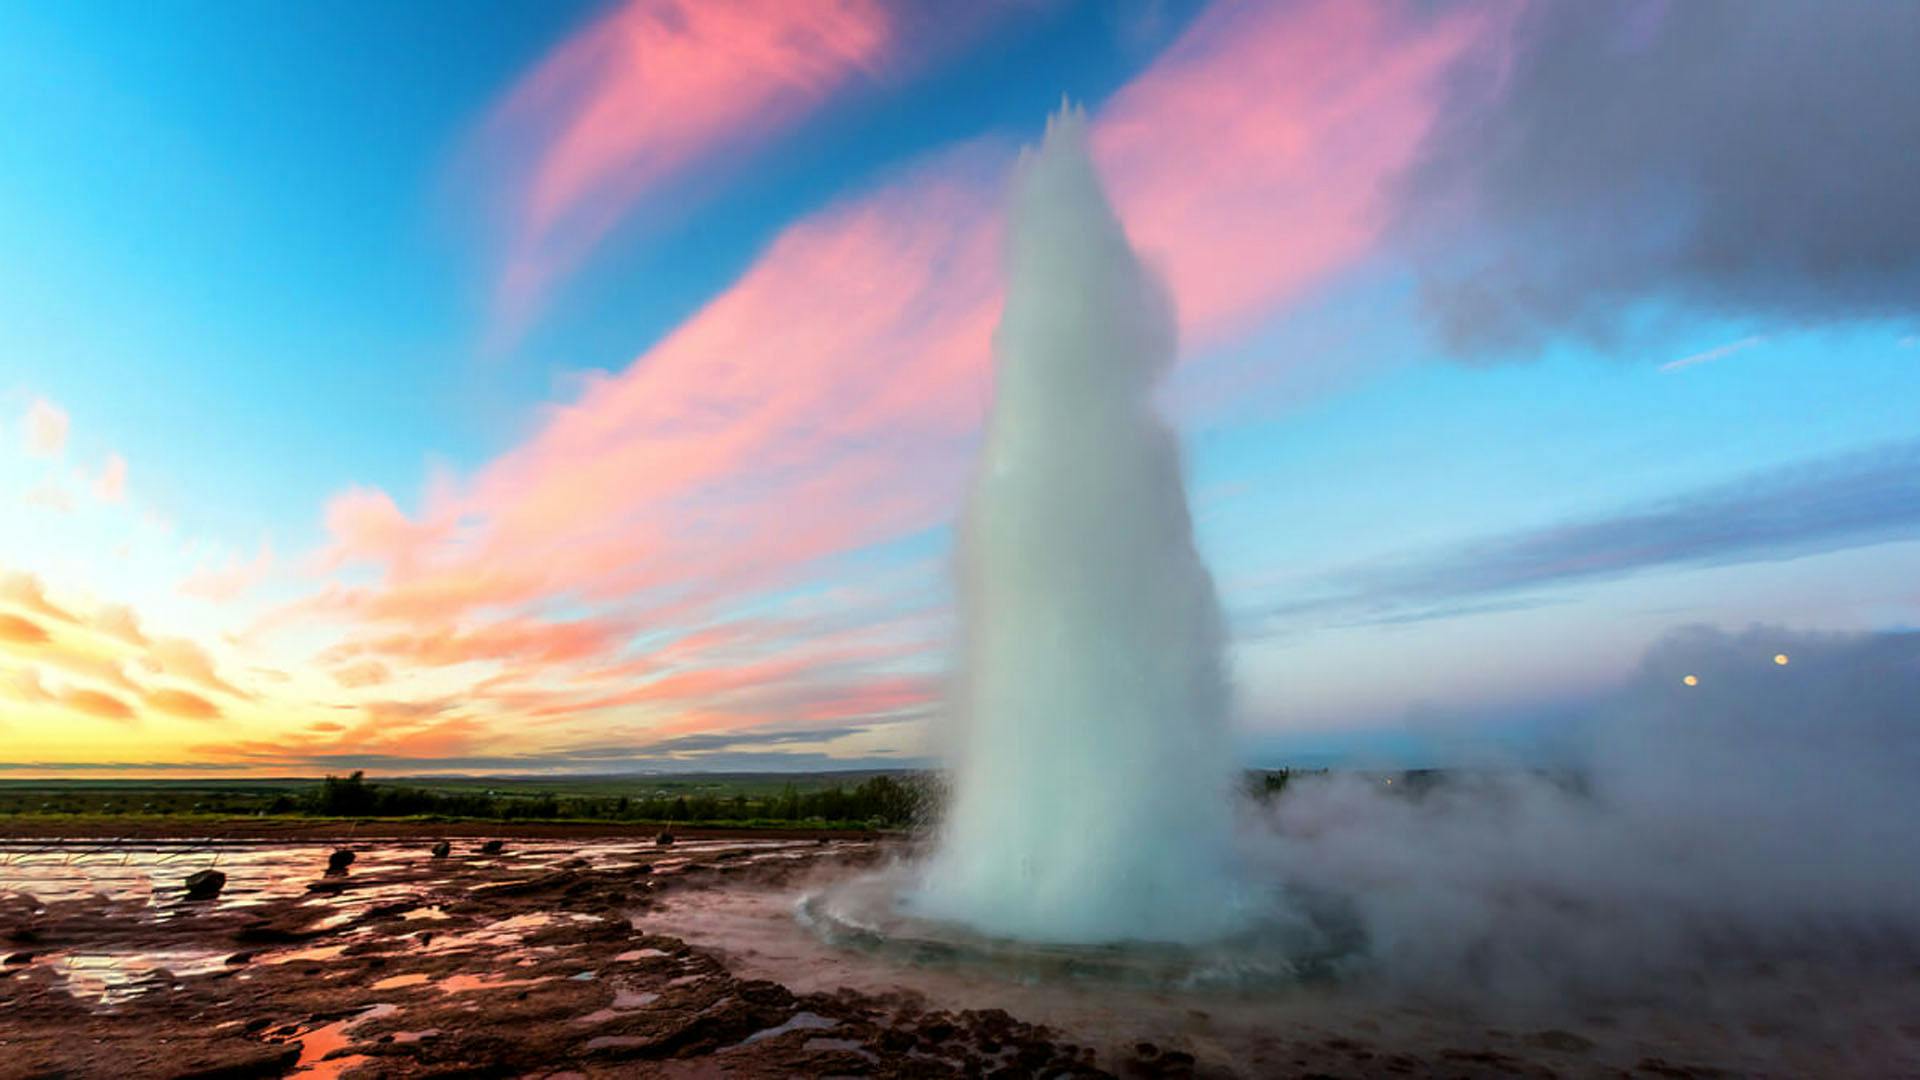 Geysir spew boiling water in the air during a sunset.